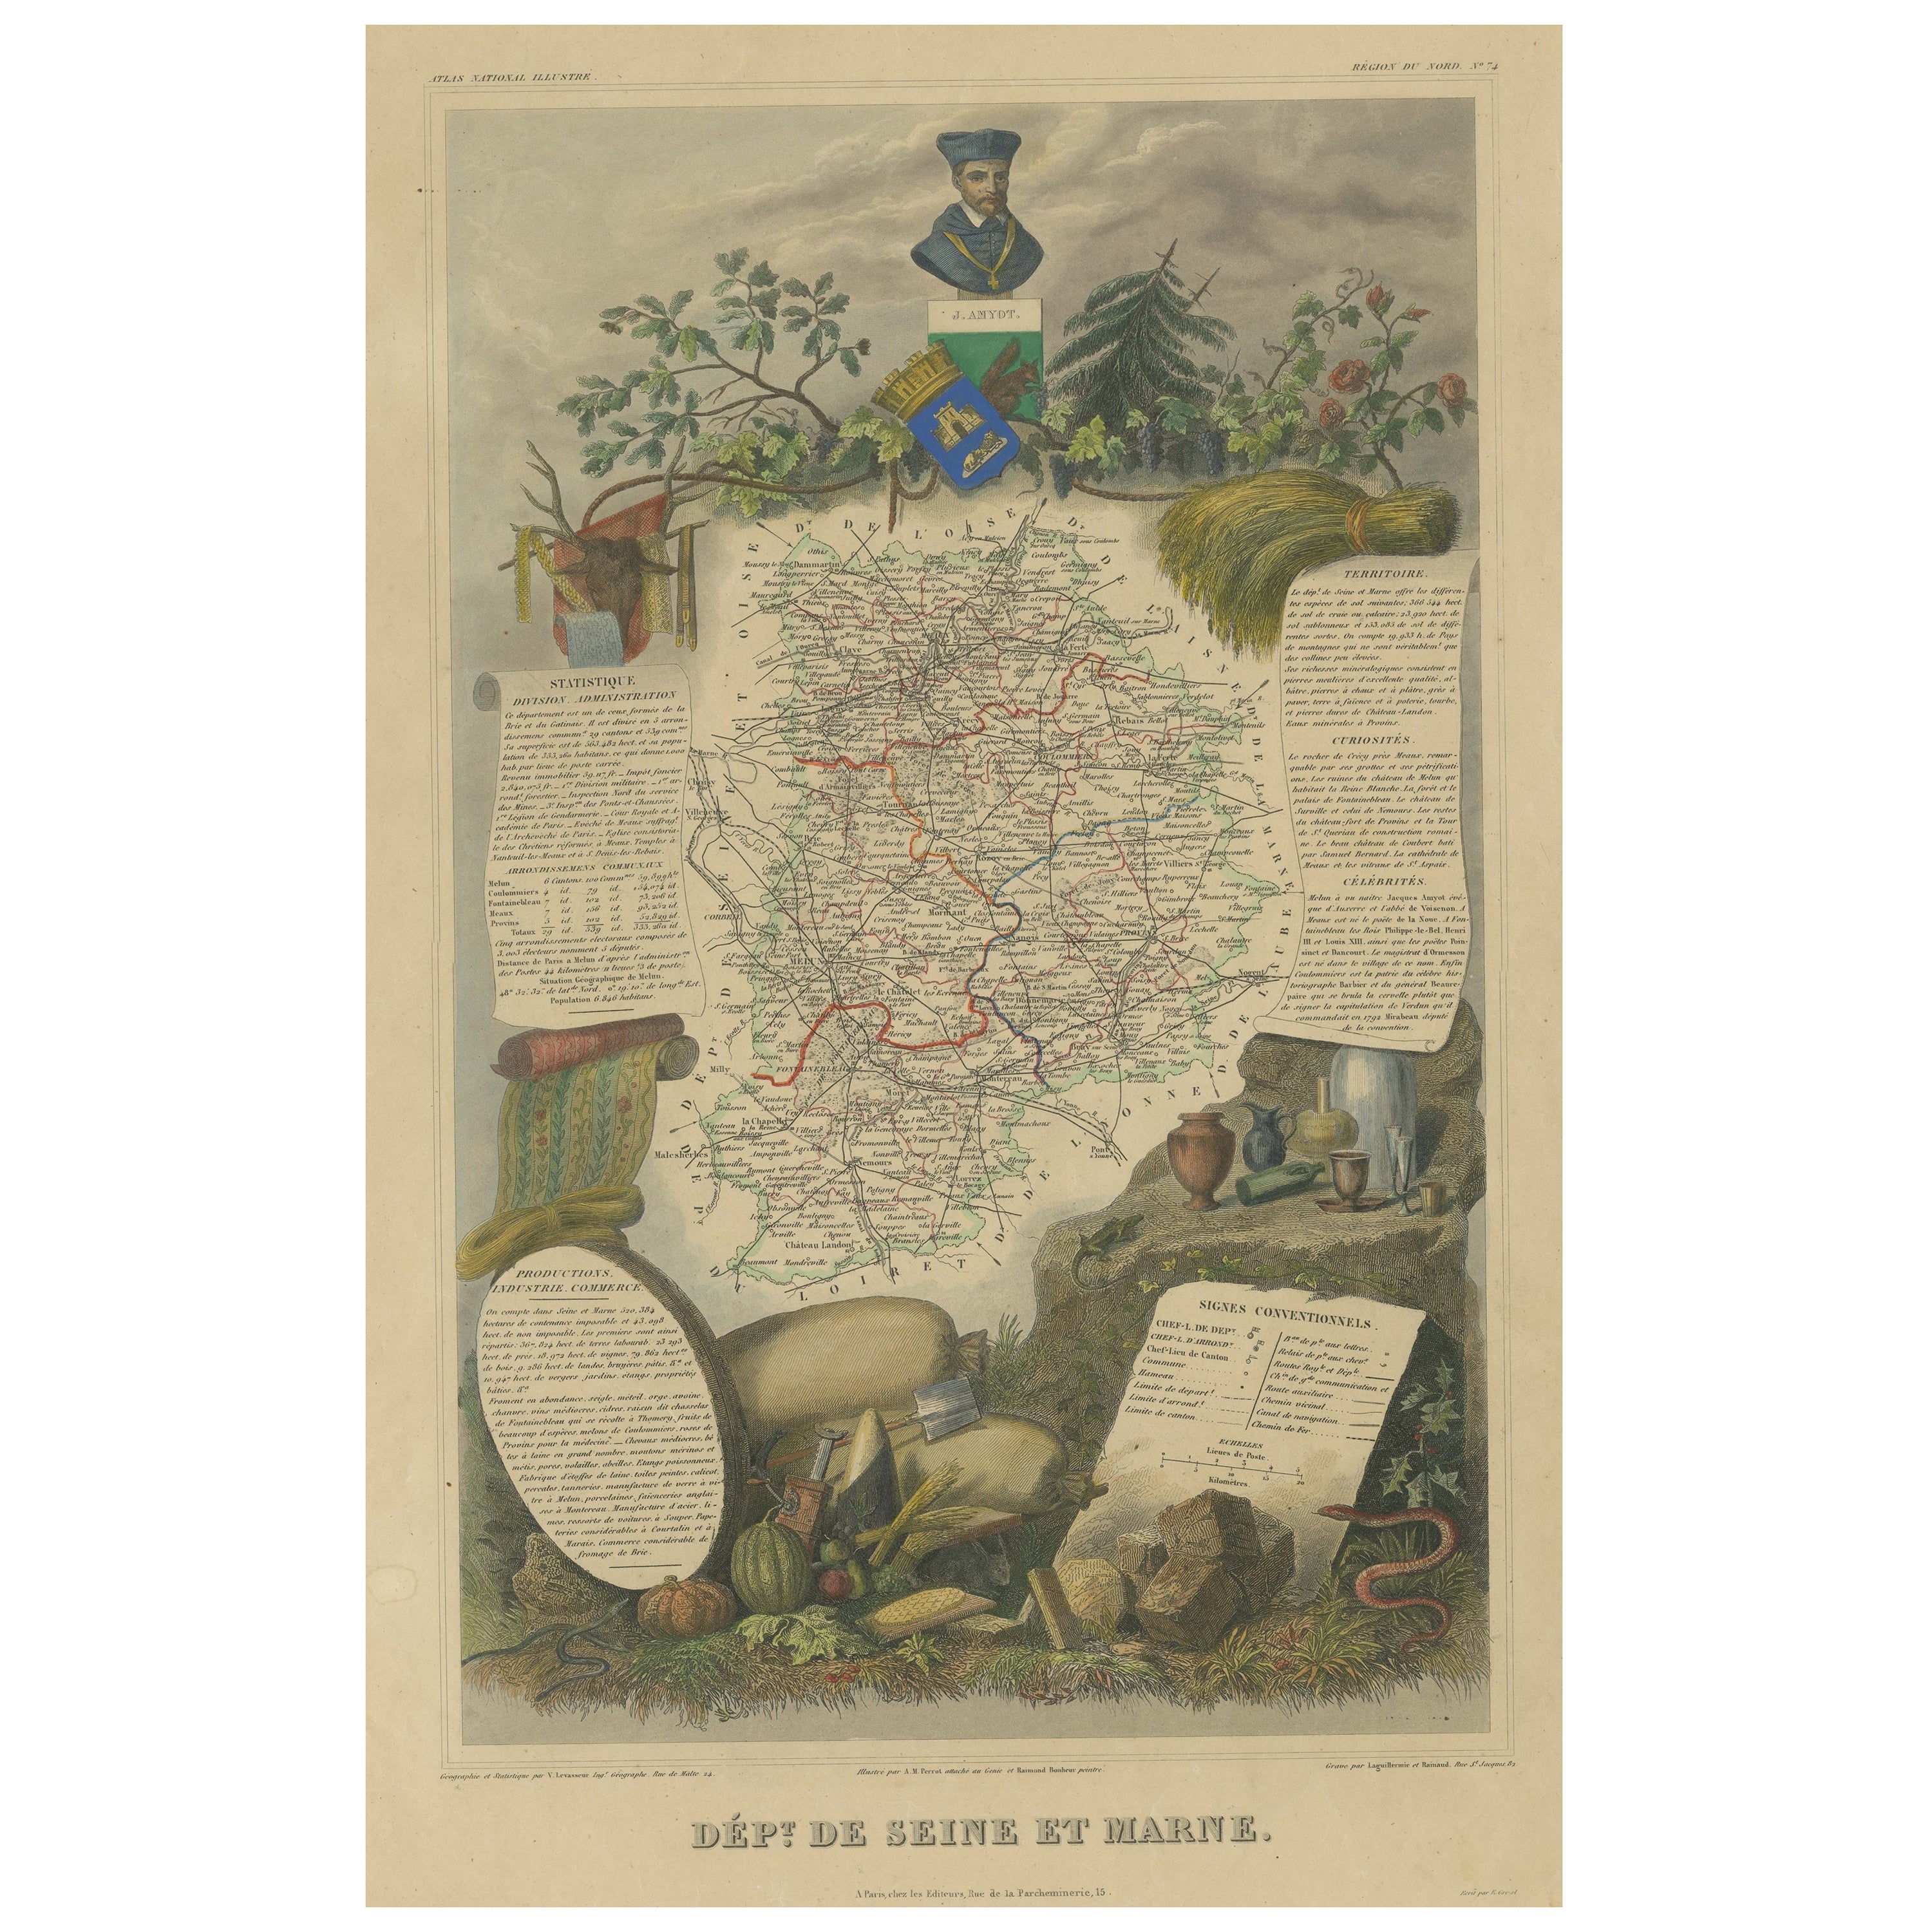 Hand Colored Antique Map of the Department of Seine Et Marne, France